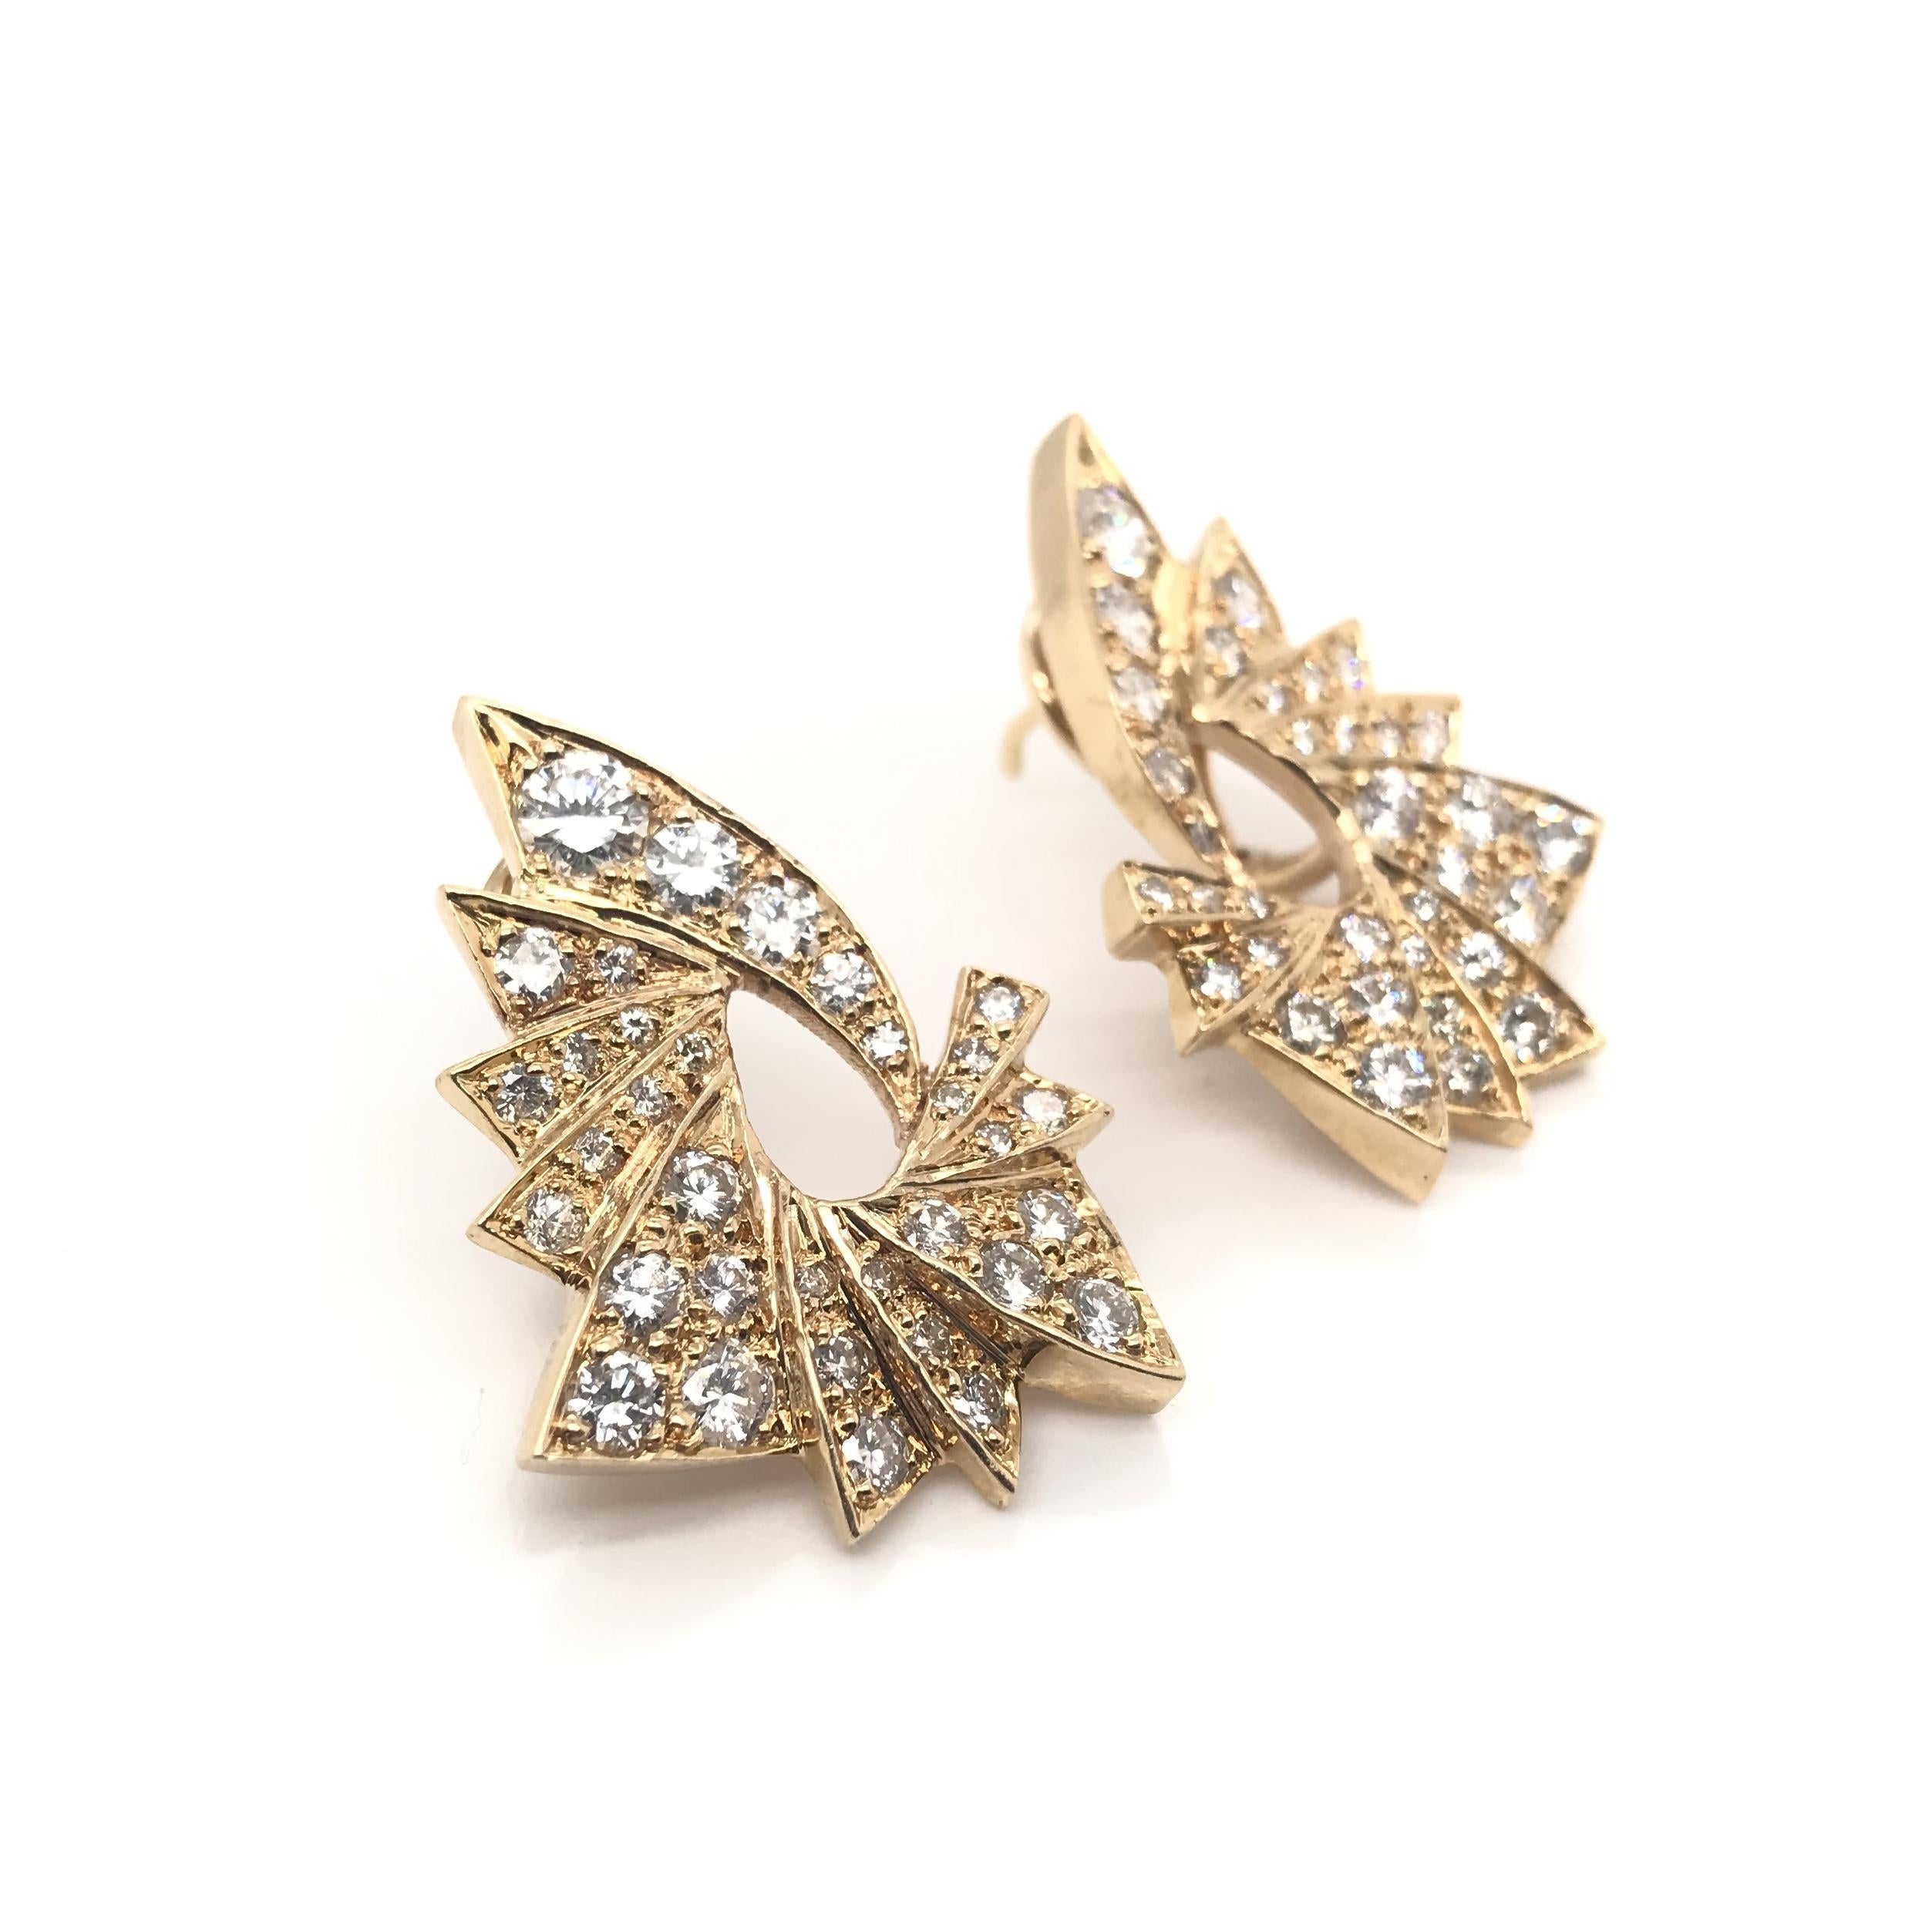 These gorgeous diamond cluster earrings are a contemporary estate piece. Each earring features 34 diamonds of varying sizes. The earrings have an approximate combined diamond weight of 3 carats. The diamonds grade approximately G in color and VS1 in